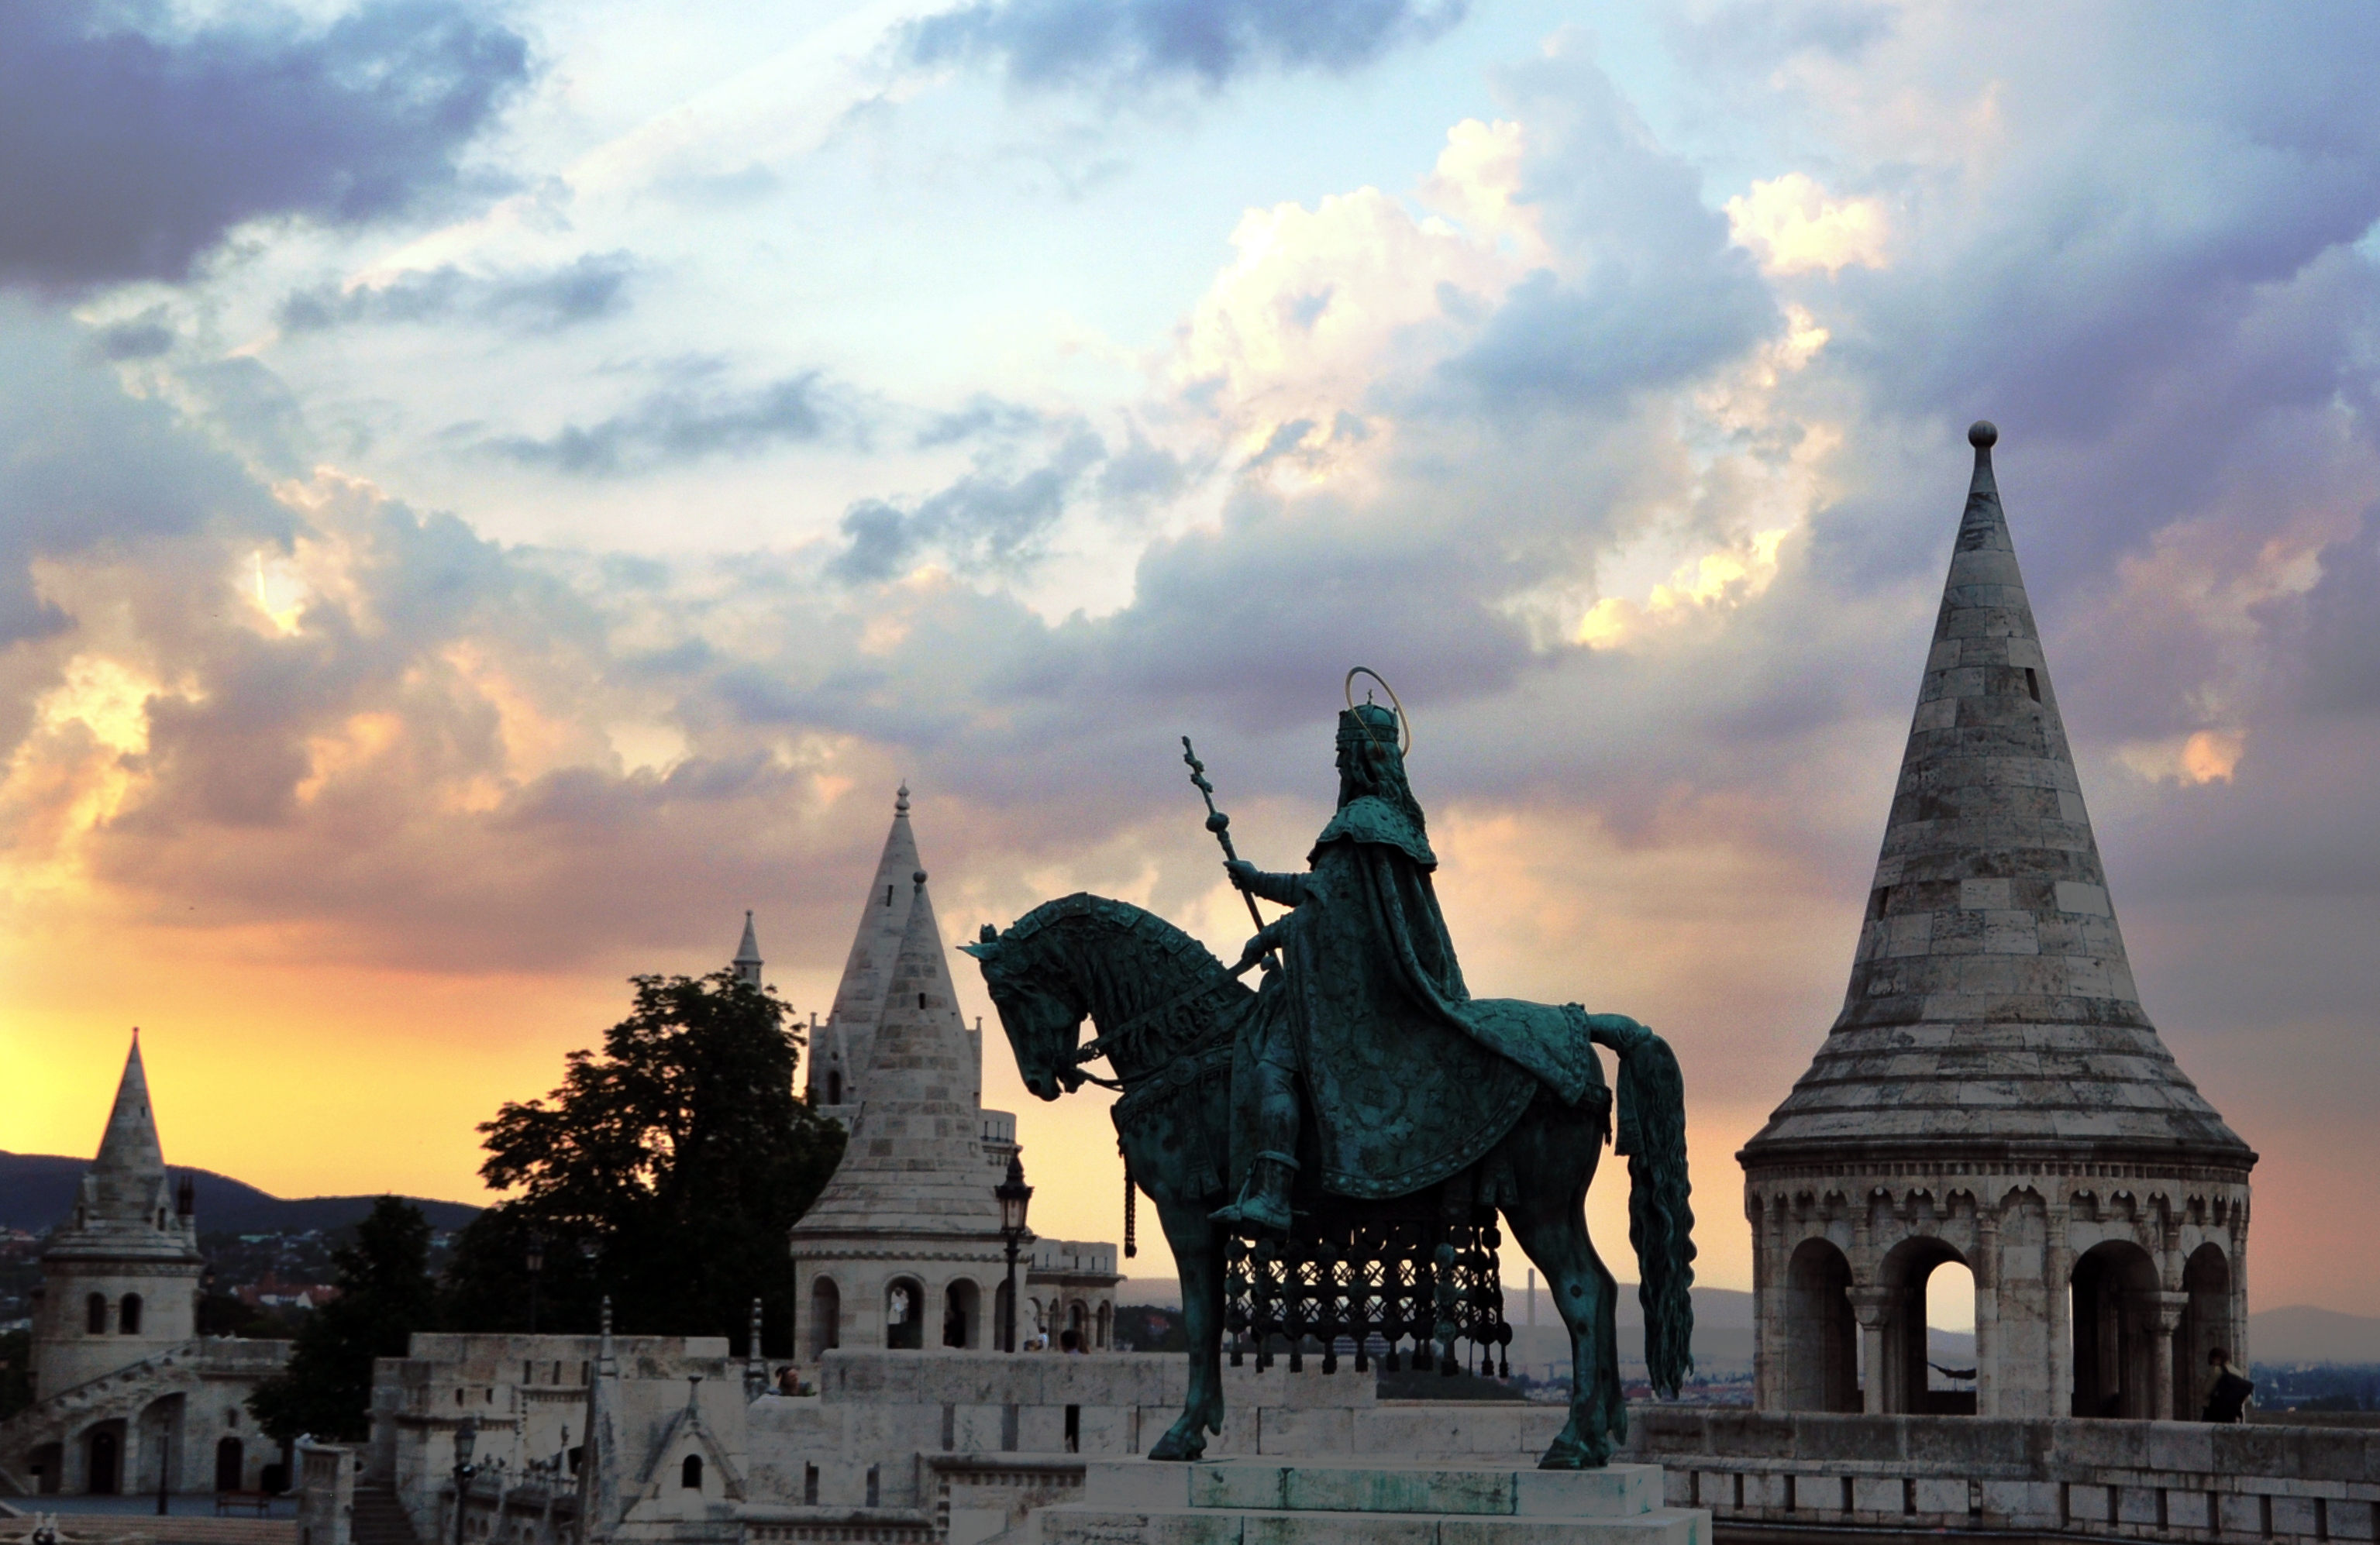 king, Architecture, Old building, Budapest, Hungary, Sunset, Clouds, Tower, Historic, Ancient, Horse, Trees, Statue, Hills Wallpaper